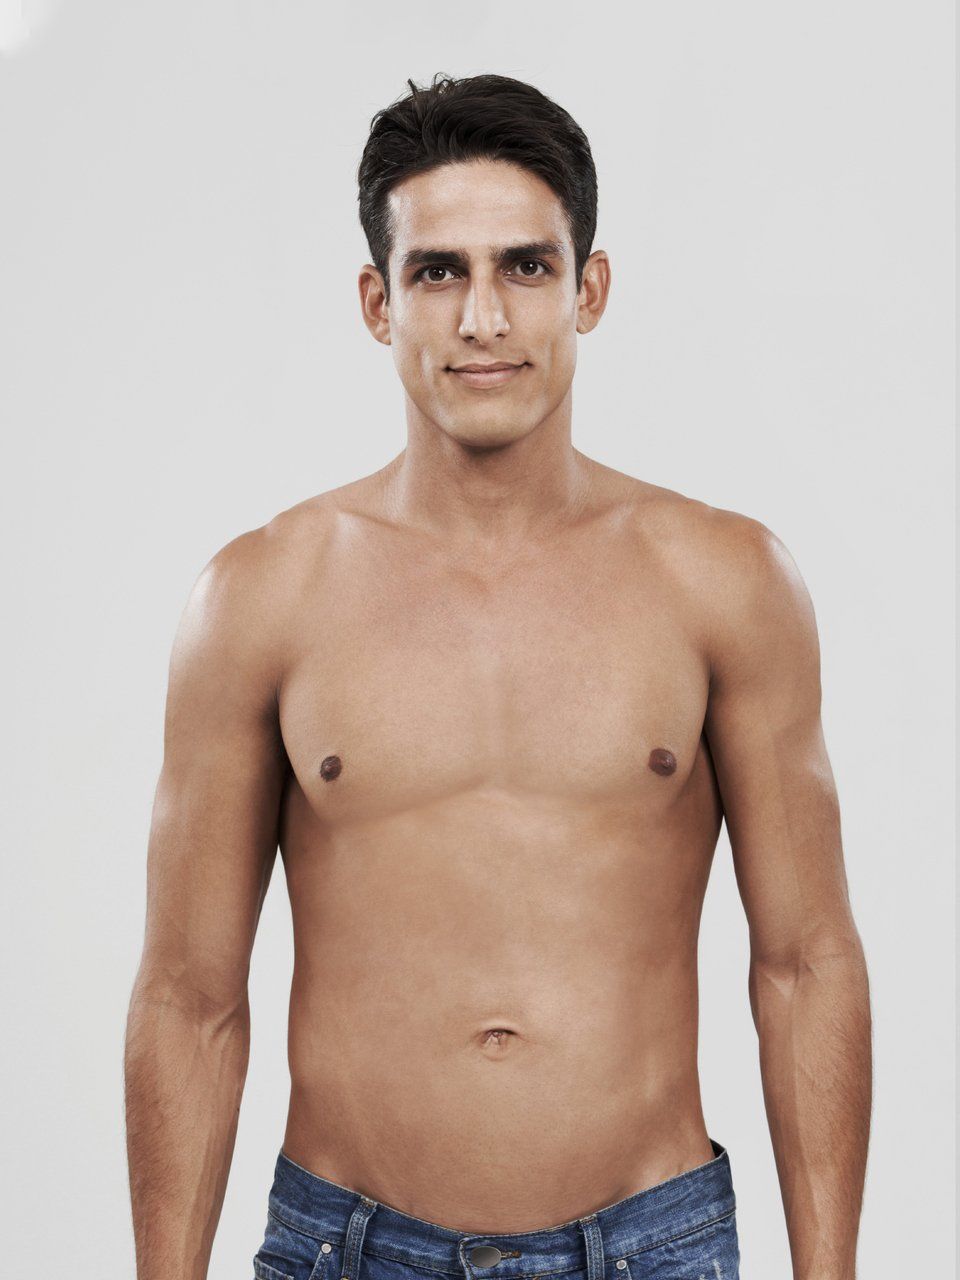 a shirtless man is standing in front of a white background